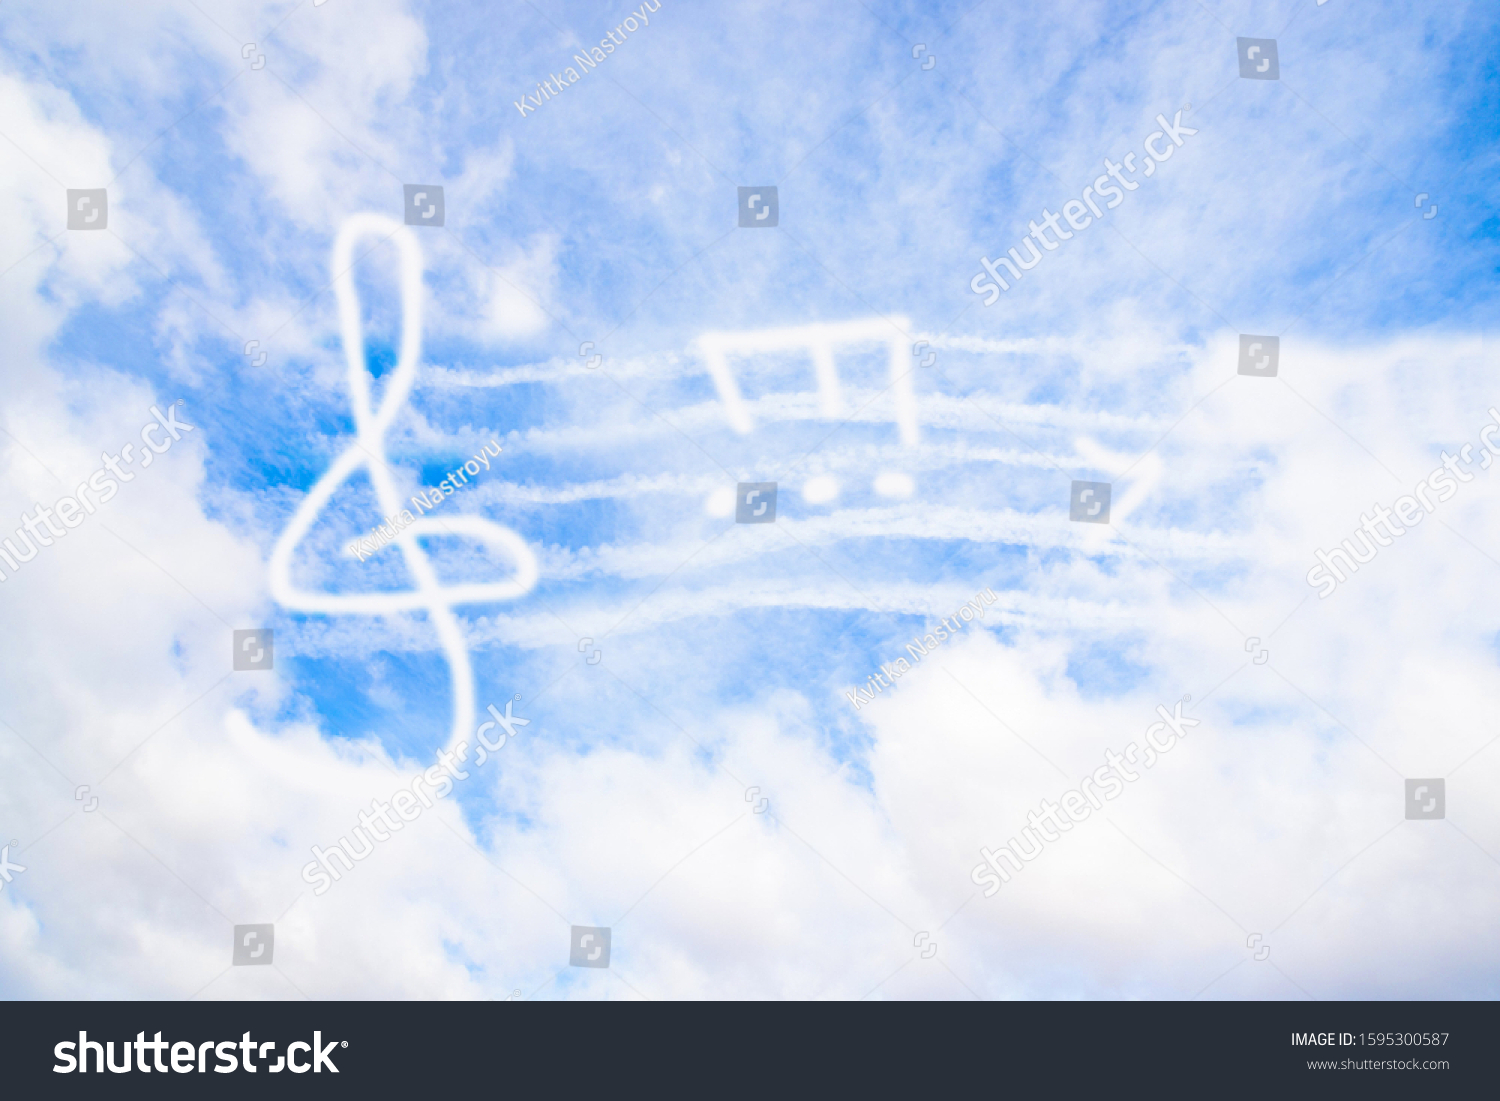 Music in heaven. Music violin clef sign or G-clef or treble clef and notes in the sky #1595300587